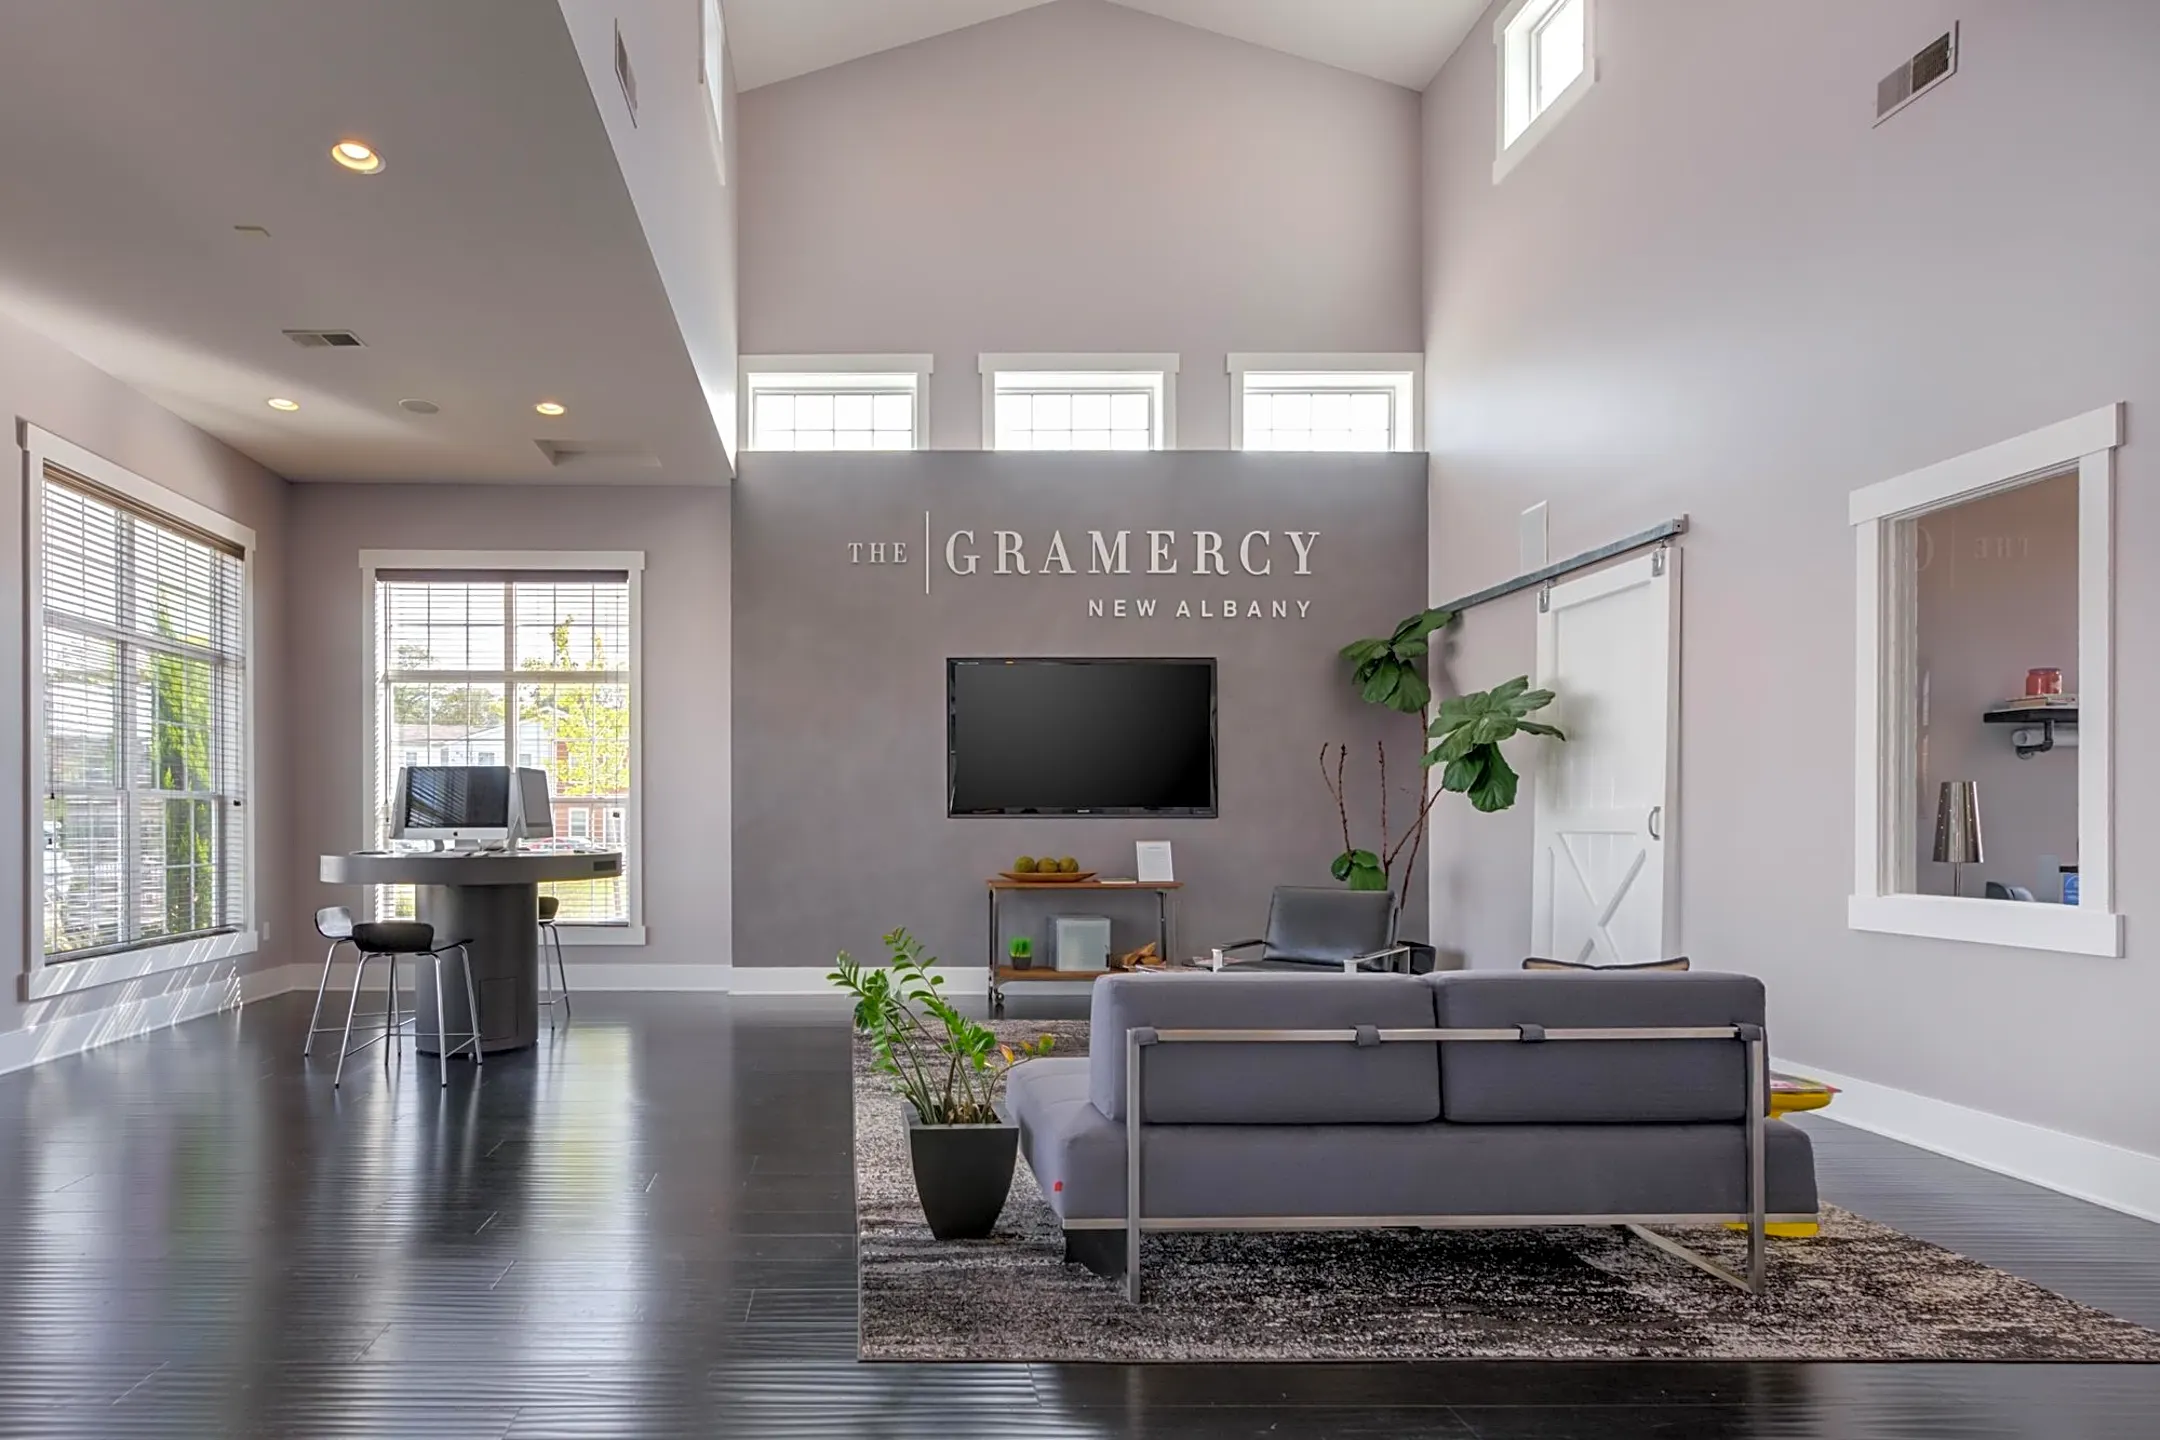 Living Room - The Gramercy at New Albany - New Albany, OH